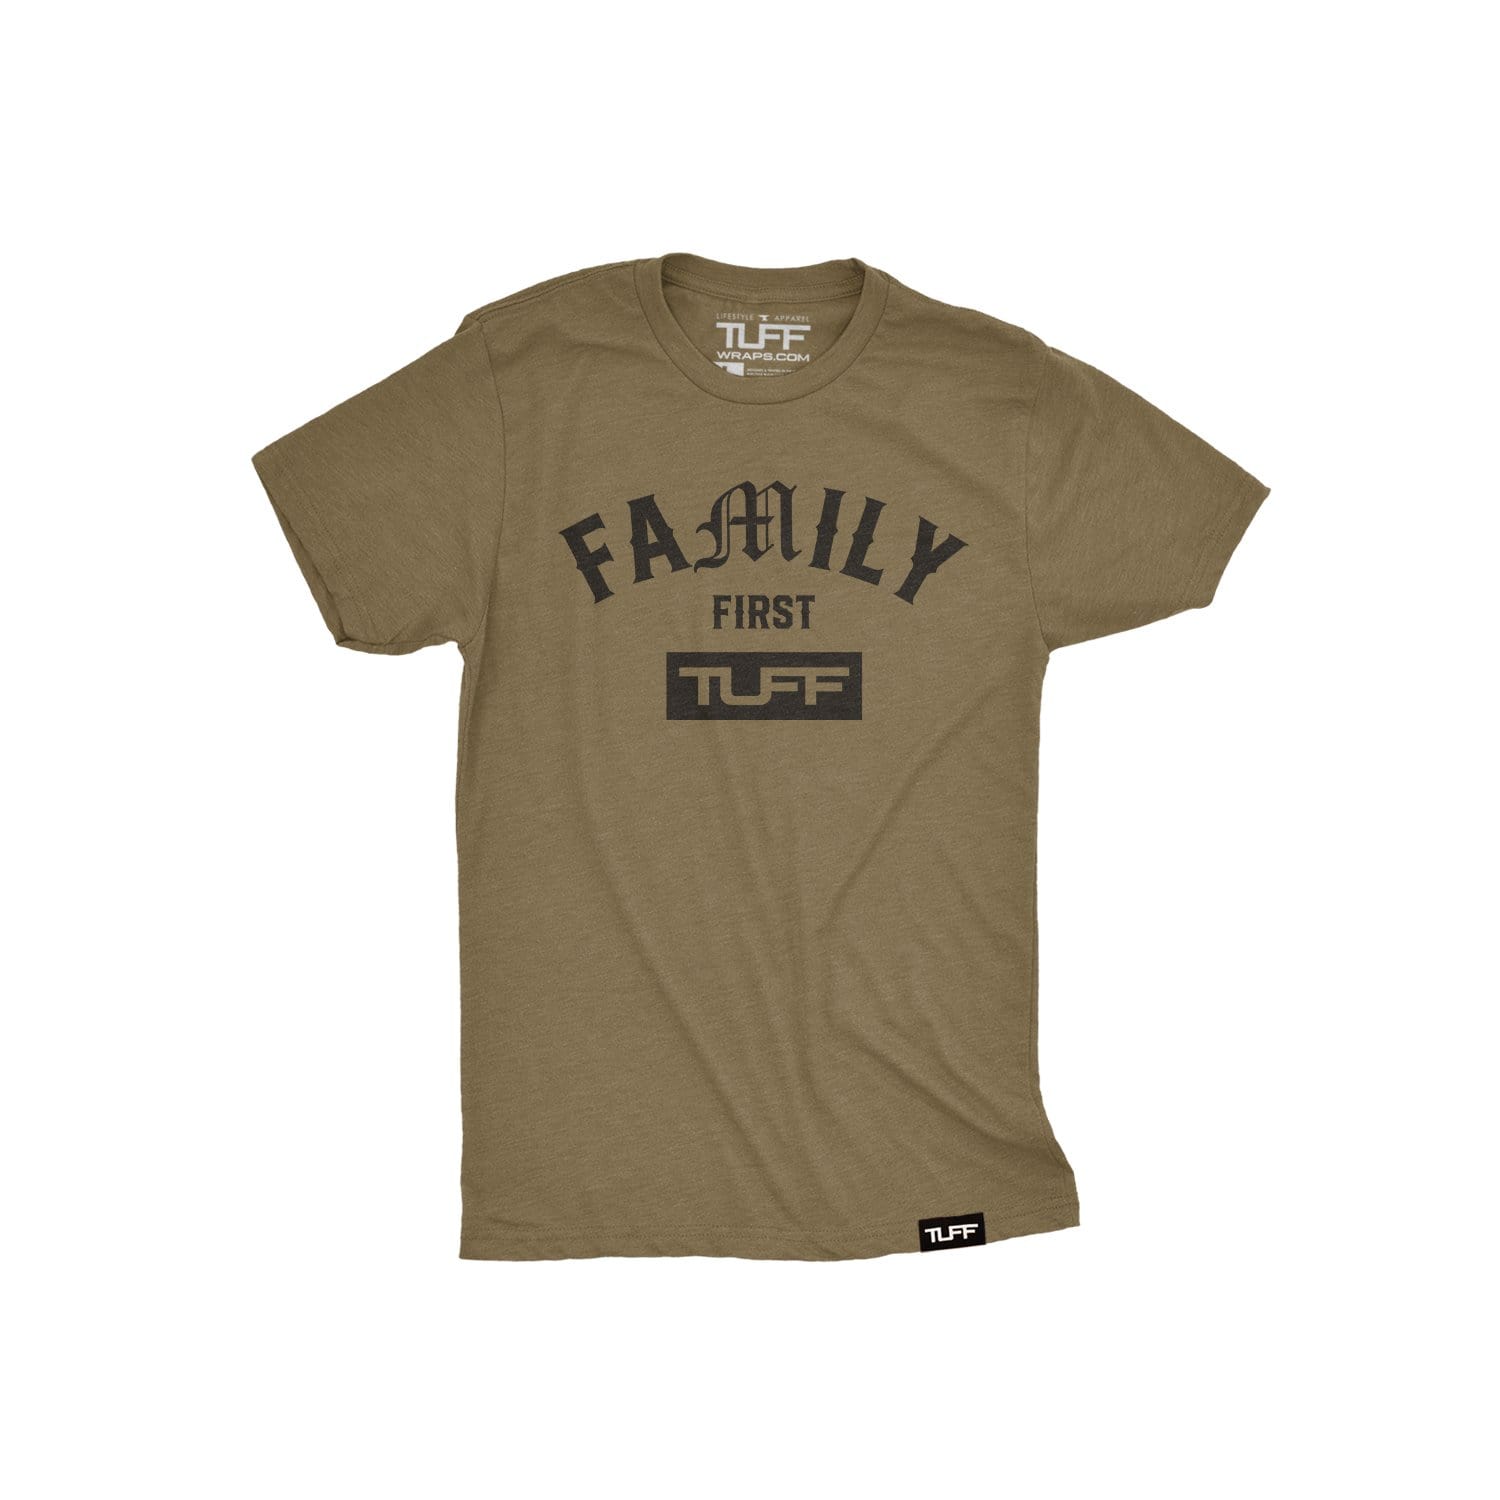 Family First Youth Tee XS / Military Green TuffWraps.com